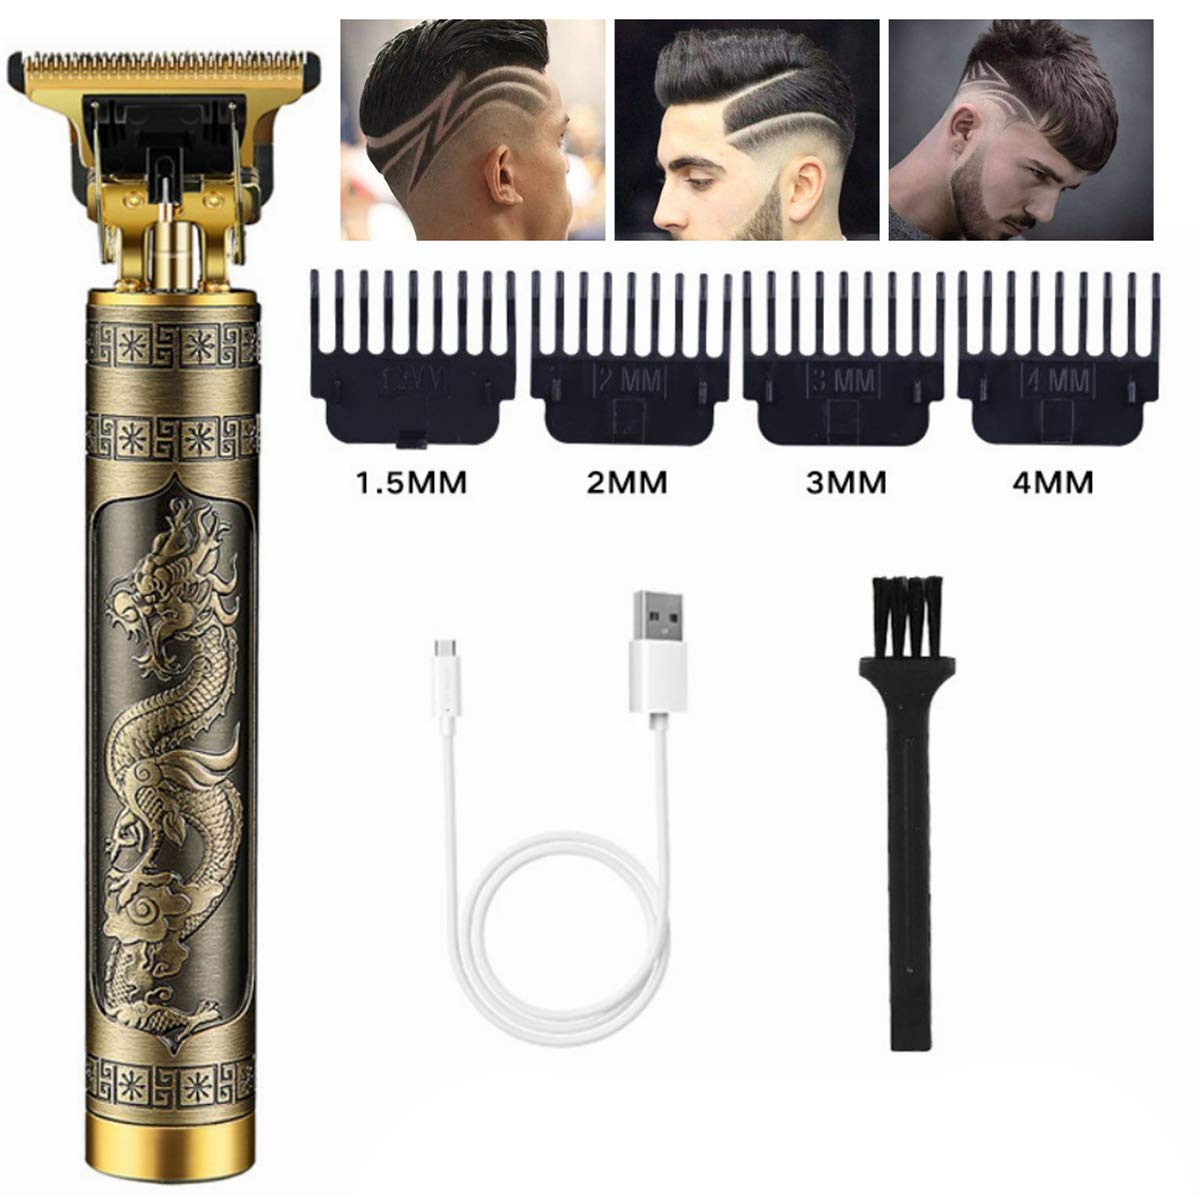 L LARHU Professional Men Hair Trimmers, Zero Gapped Cordless Hair Trimmer, Rechargeable T-Blade Haircut & Grooming Kit Line Up Edgers Clippers for Men Home Use (A)